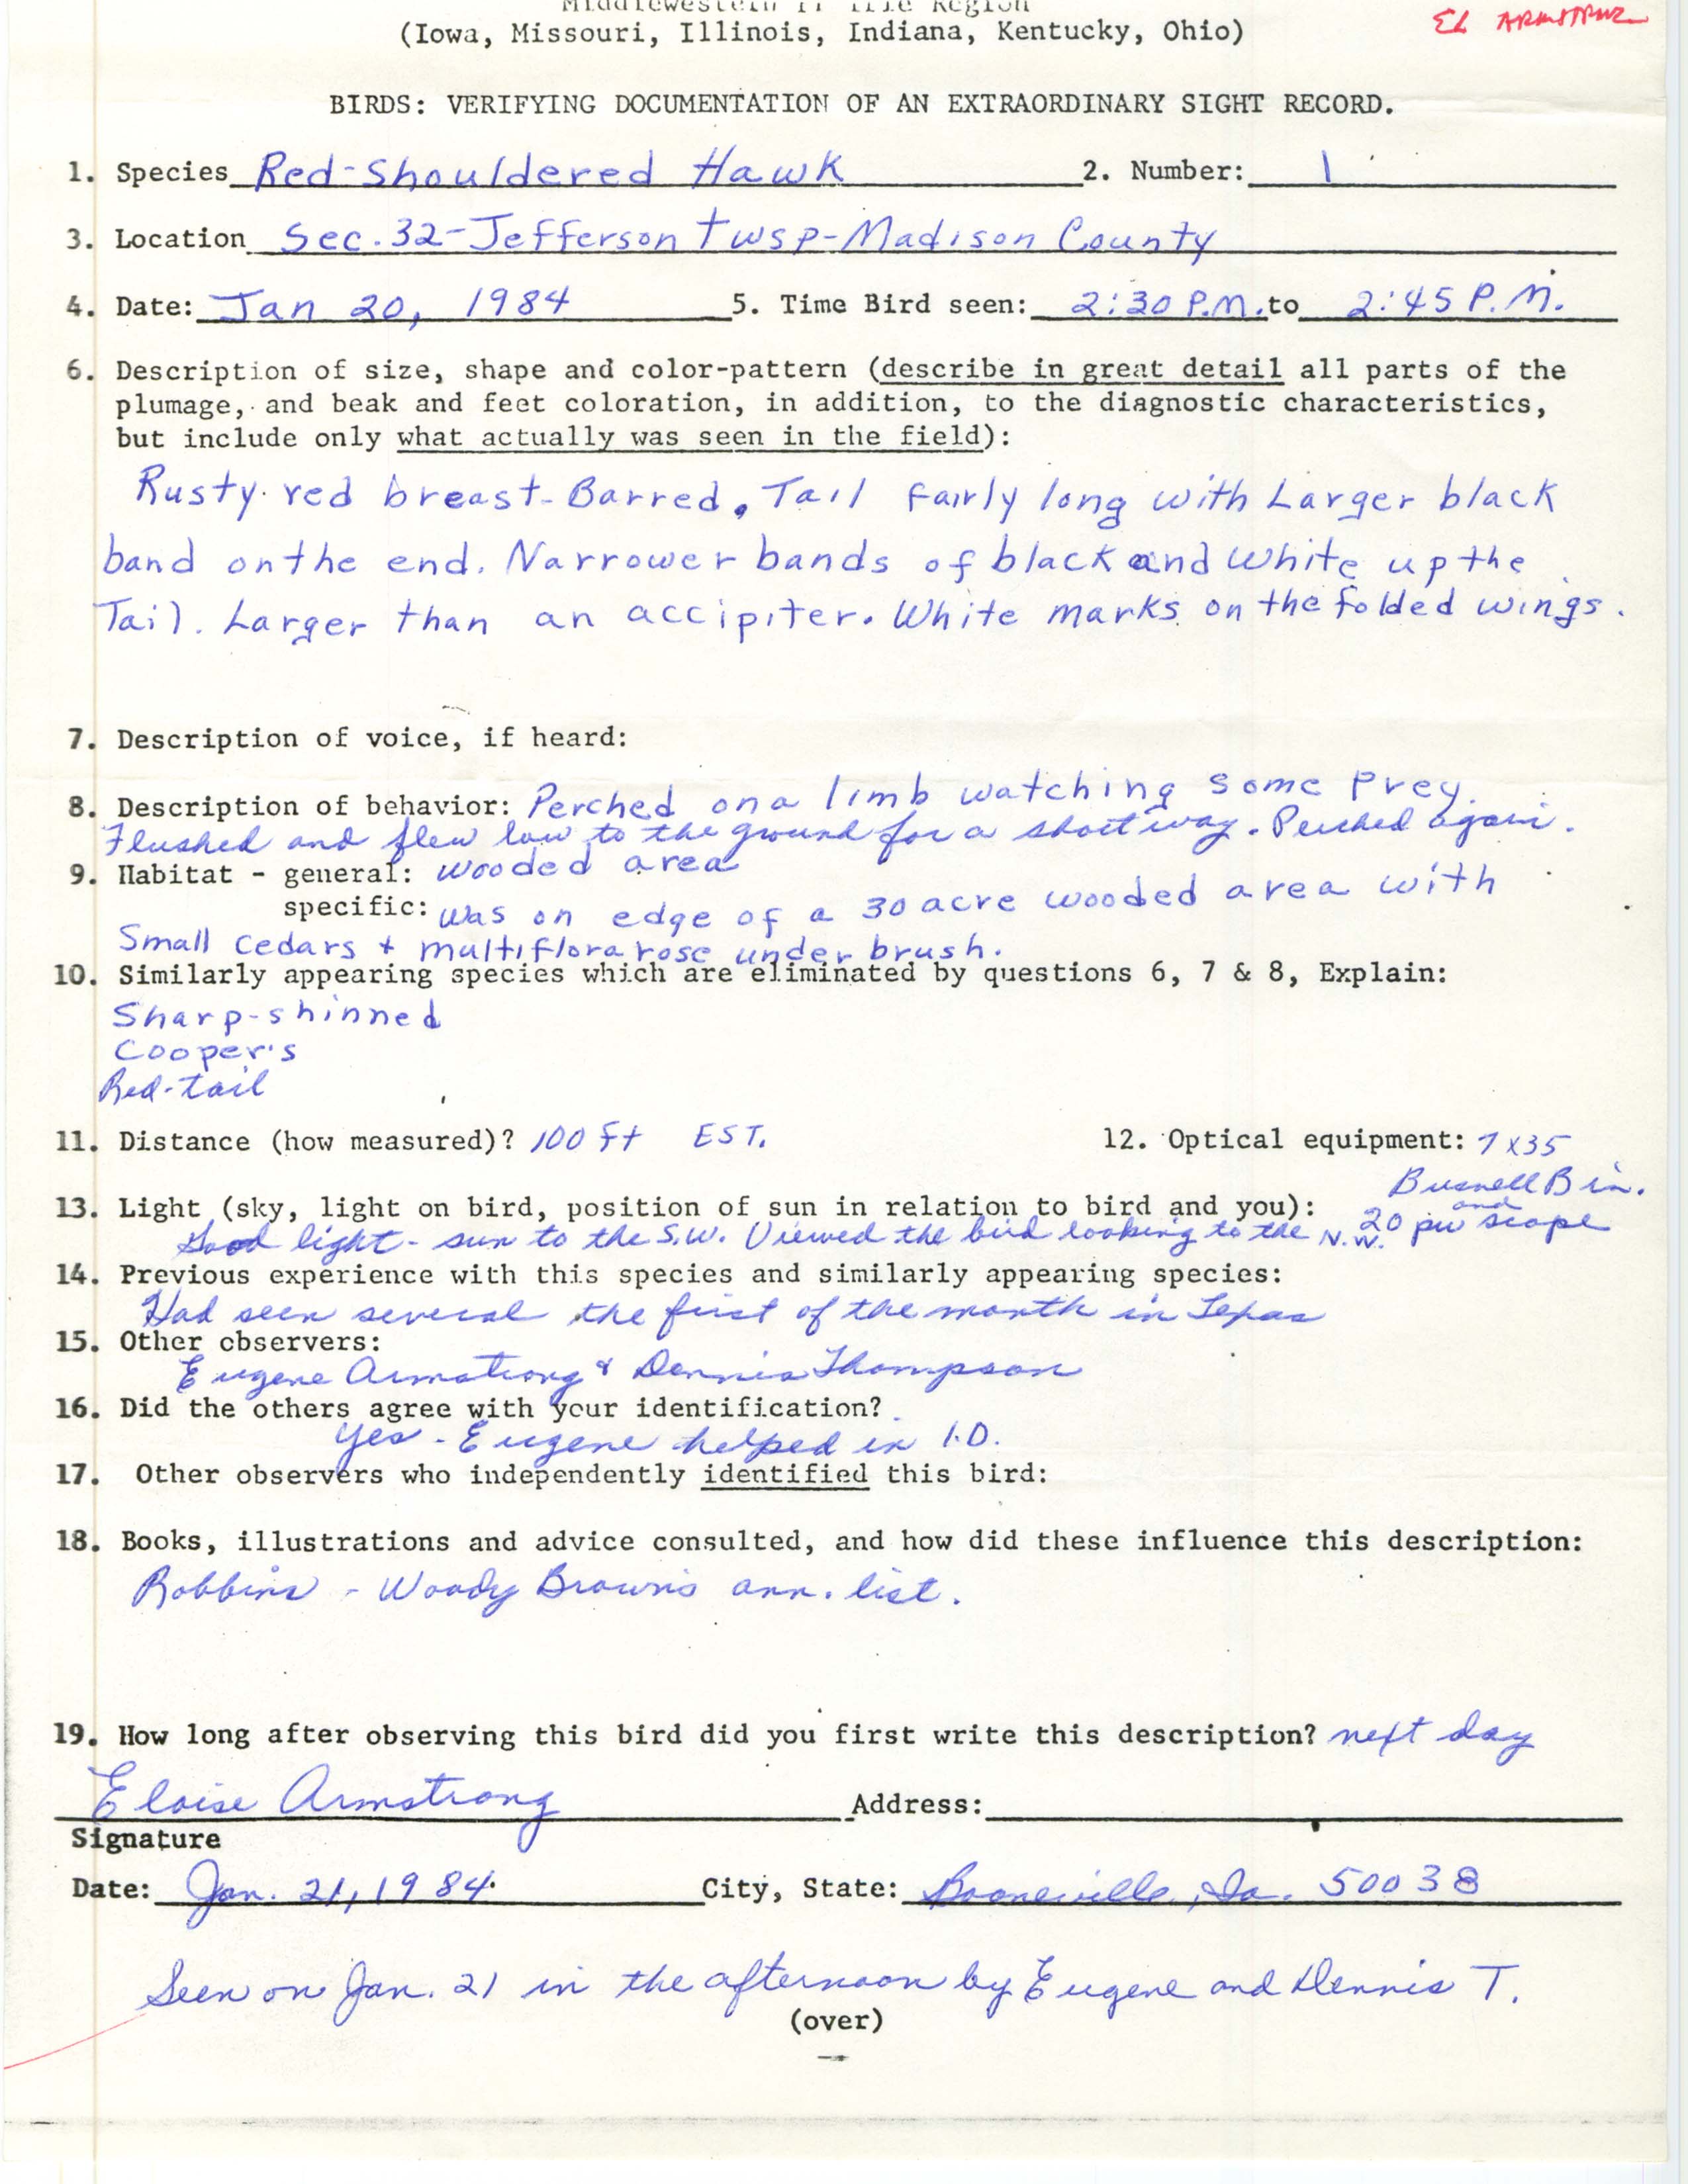 Rare bird documentation form for Red-shouldered Hawk at Jefferson Township in Madison County, 1984